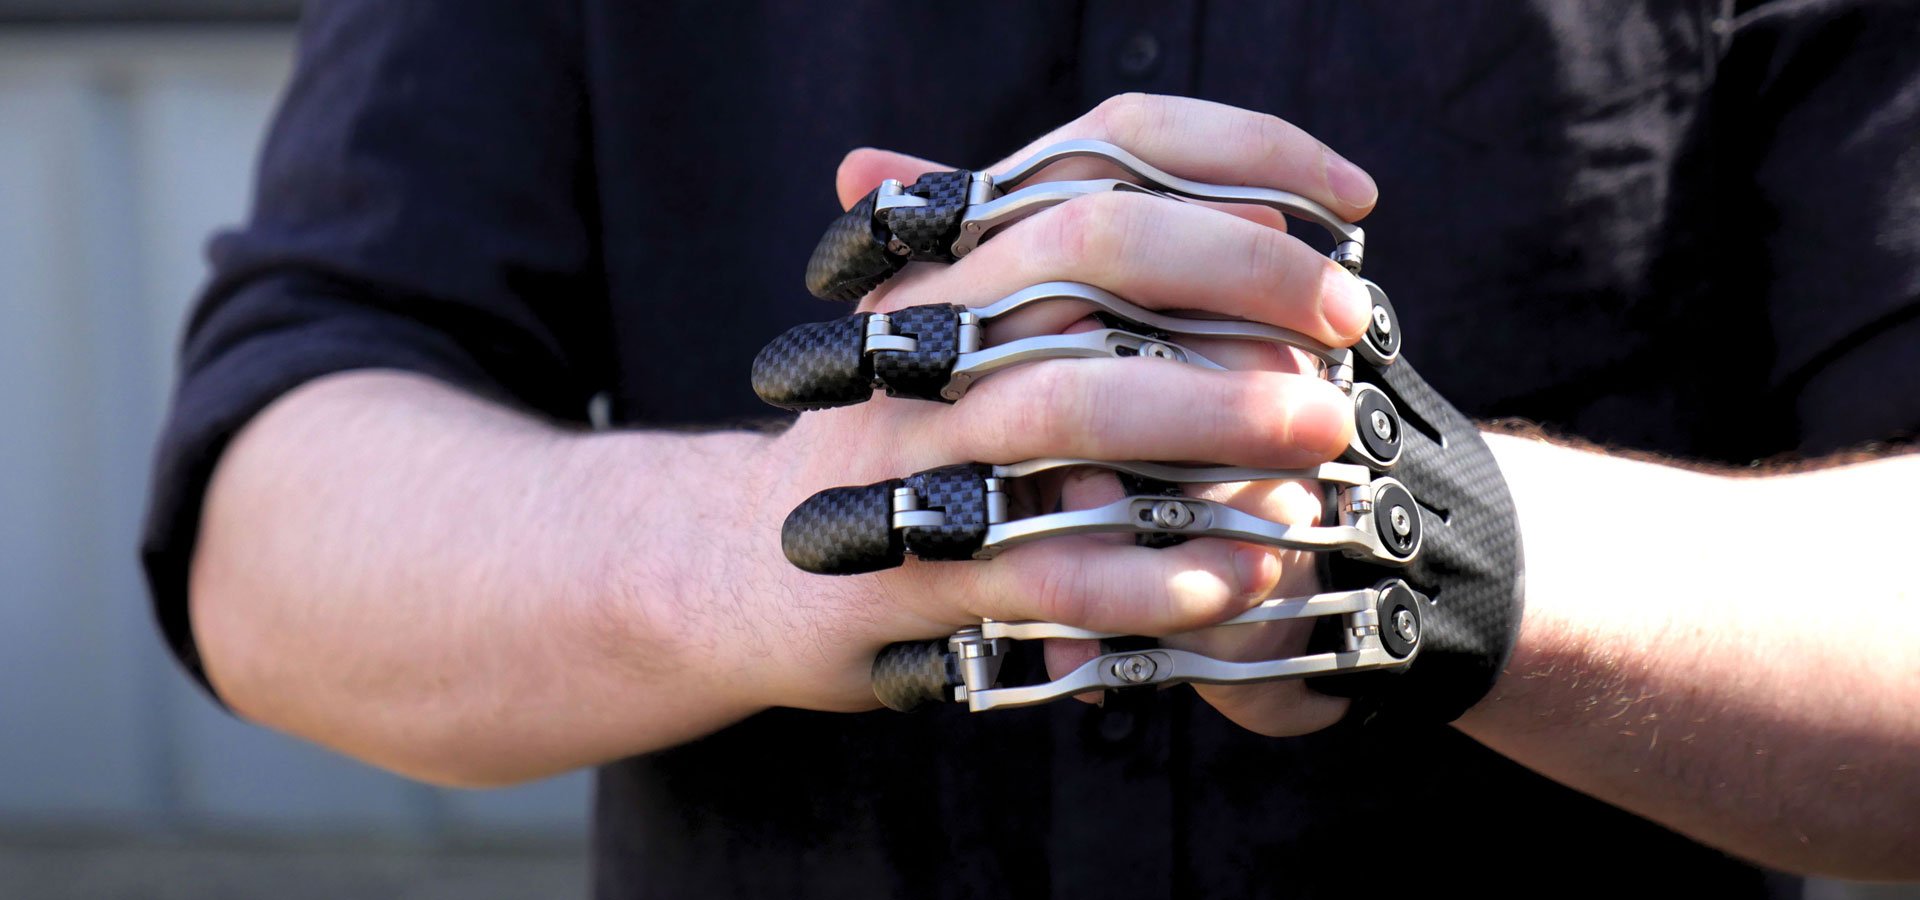 Naked Prosthetics It S All About Function Prosthetic Fingers